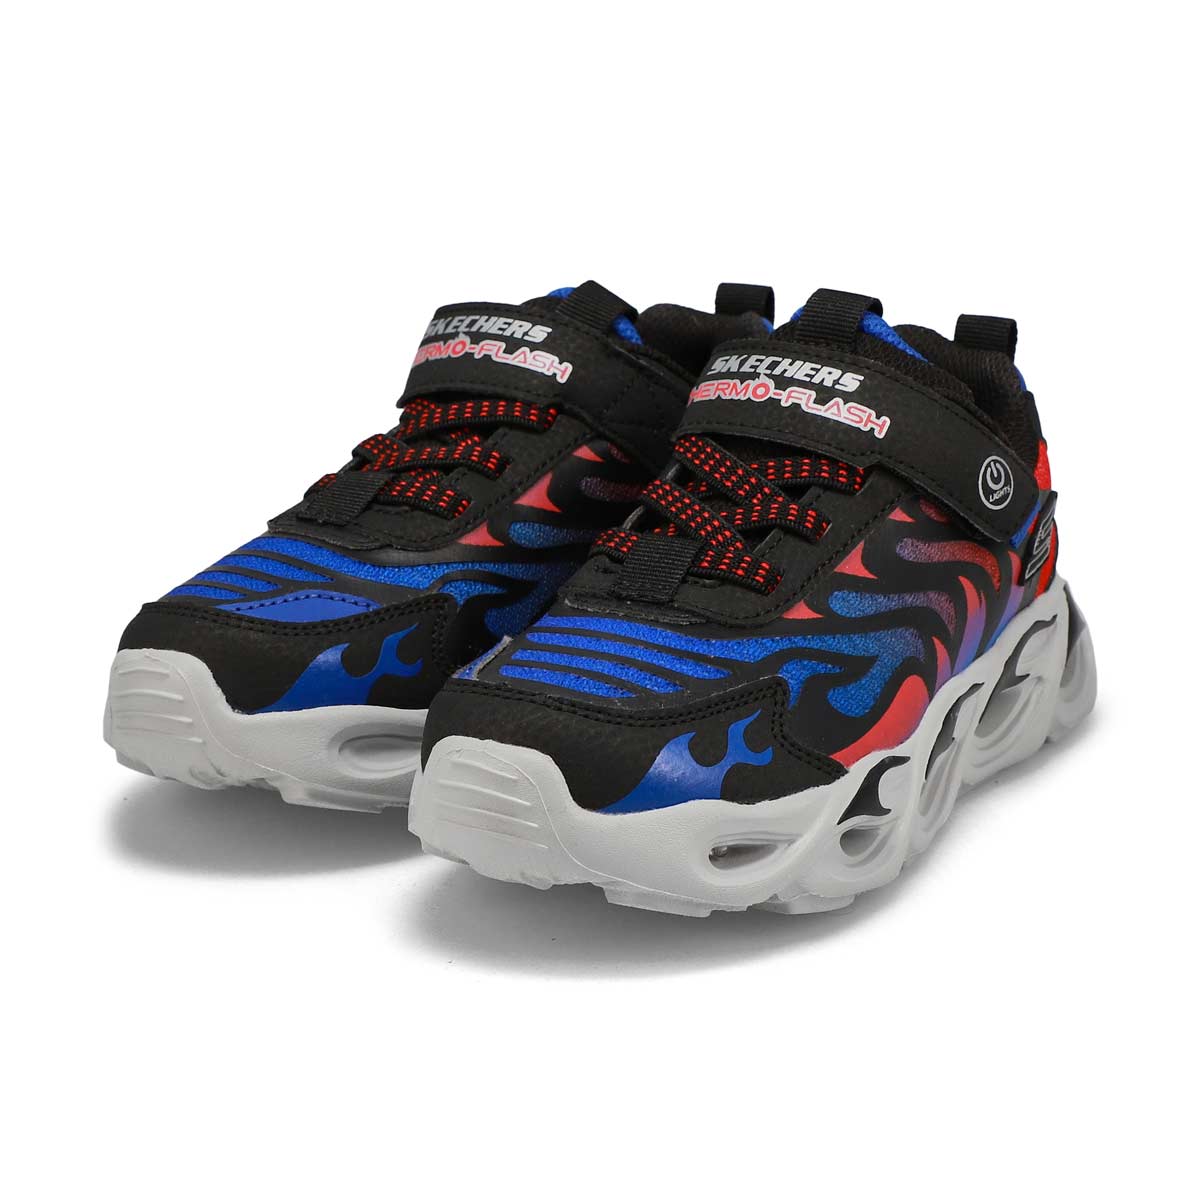 Boys' Thermo-Flash Light Up Sneakers - Black/Blue